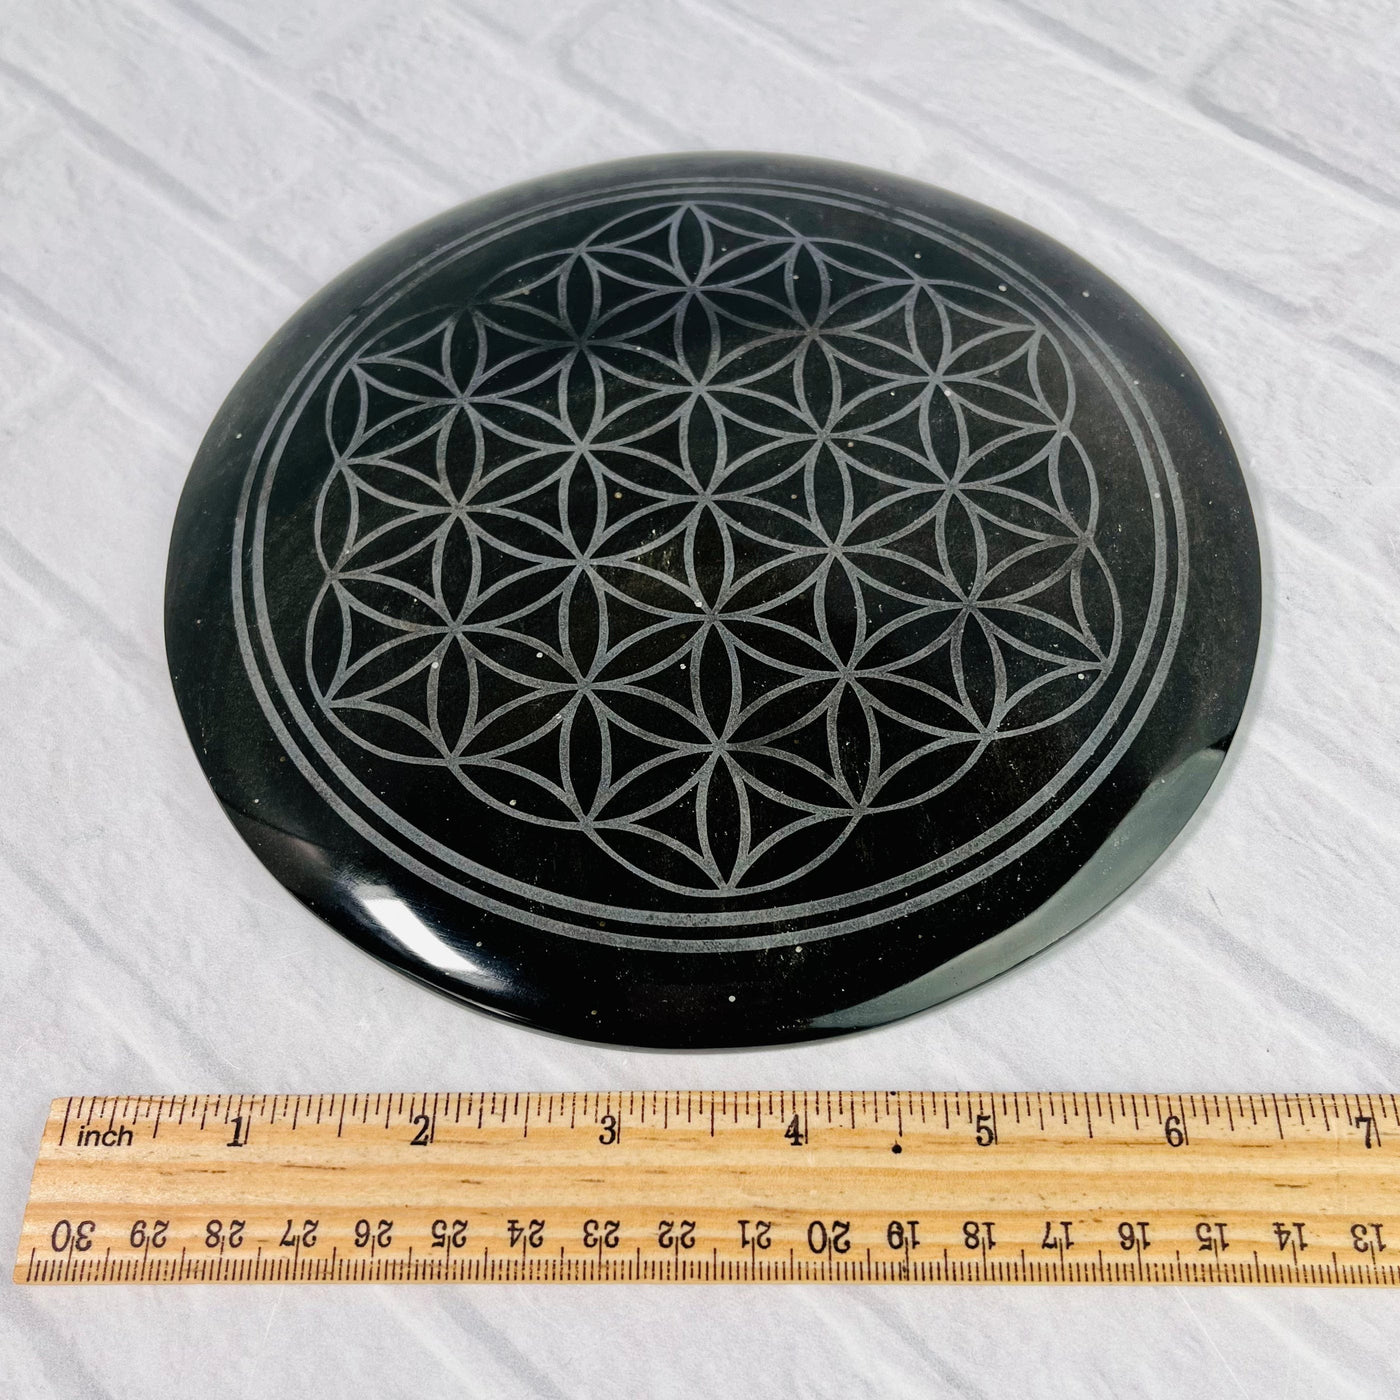 Gold Sheen Obsidian Flower of Life Plate displayed on a white surface next to ruler for size reference.